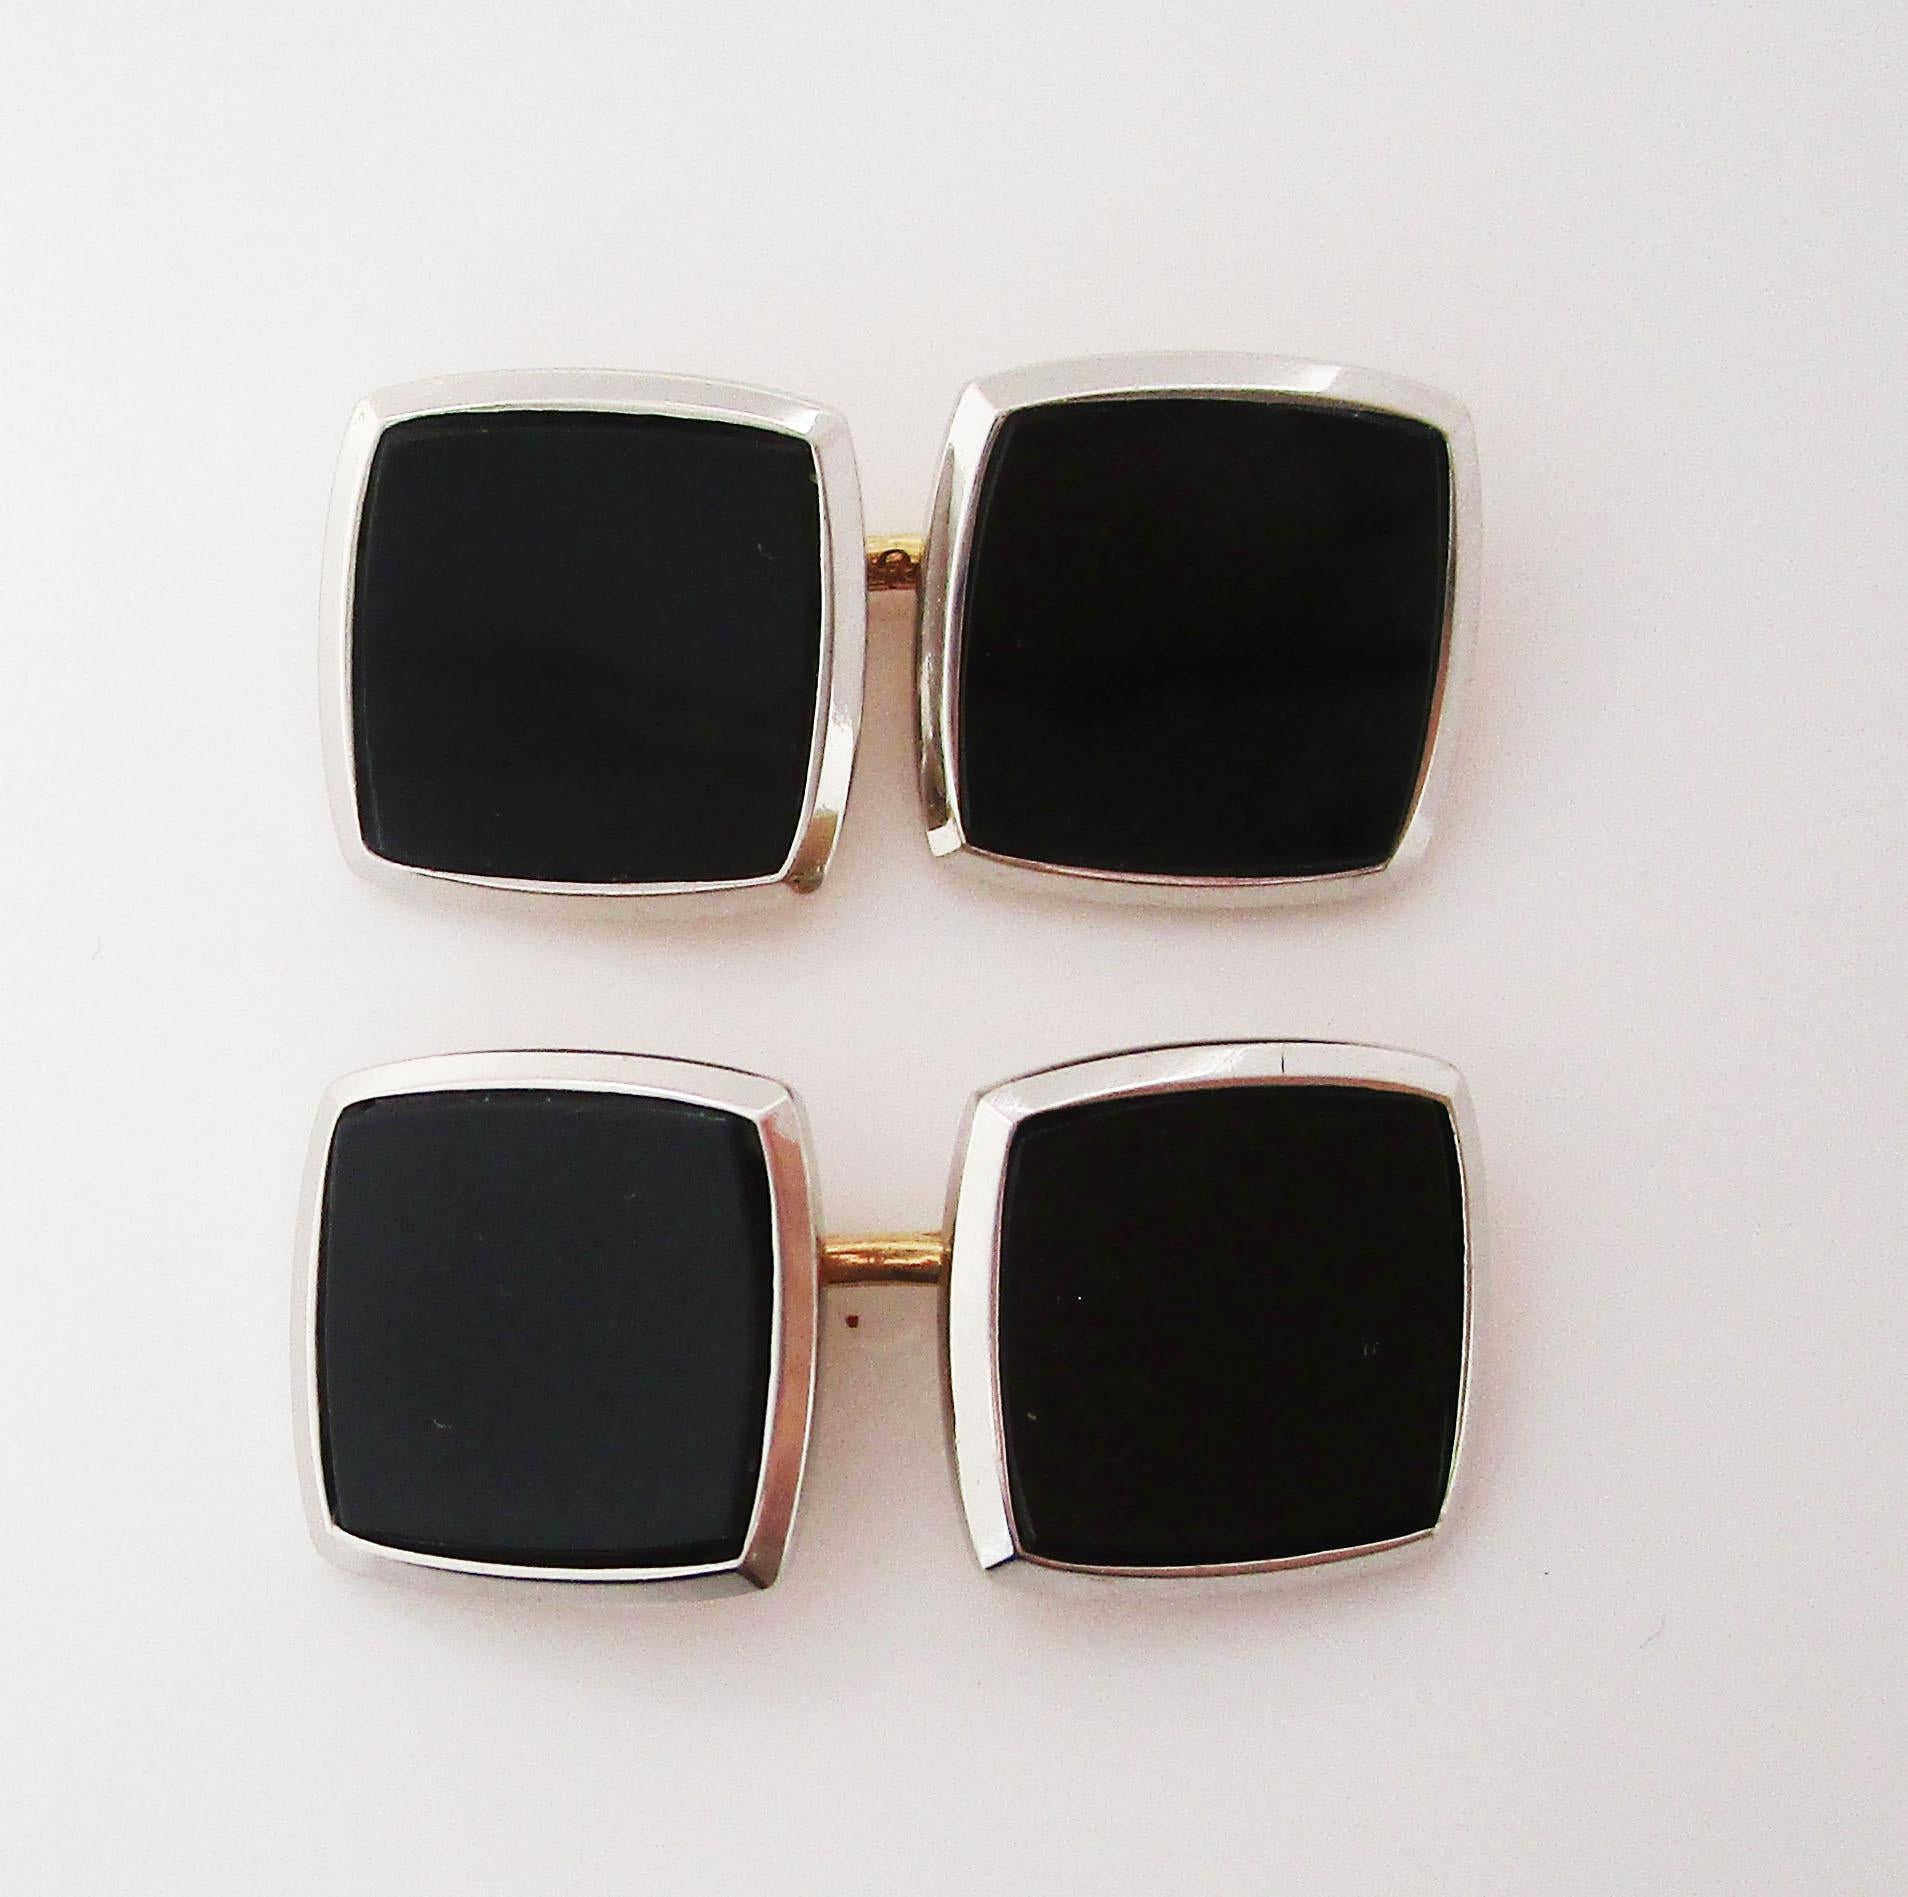 This elegant pair of cufflinks is original Art Deco links from 1920 in two colors of 14k gold with black onyx centers. The backs of the links are warm 14k yellow gold, while the frames of the panels are bright 14k white gold. The center of the